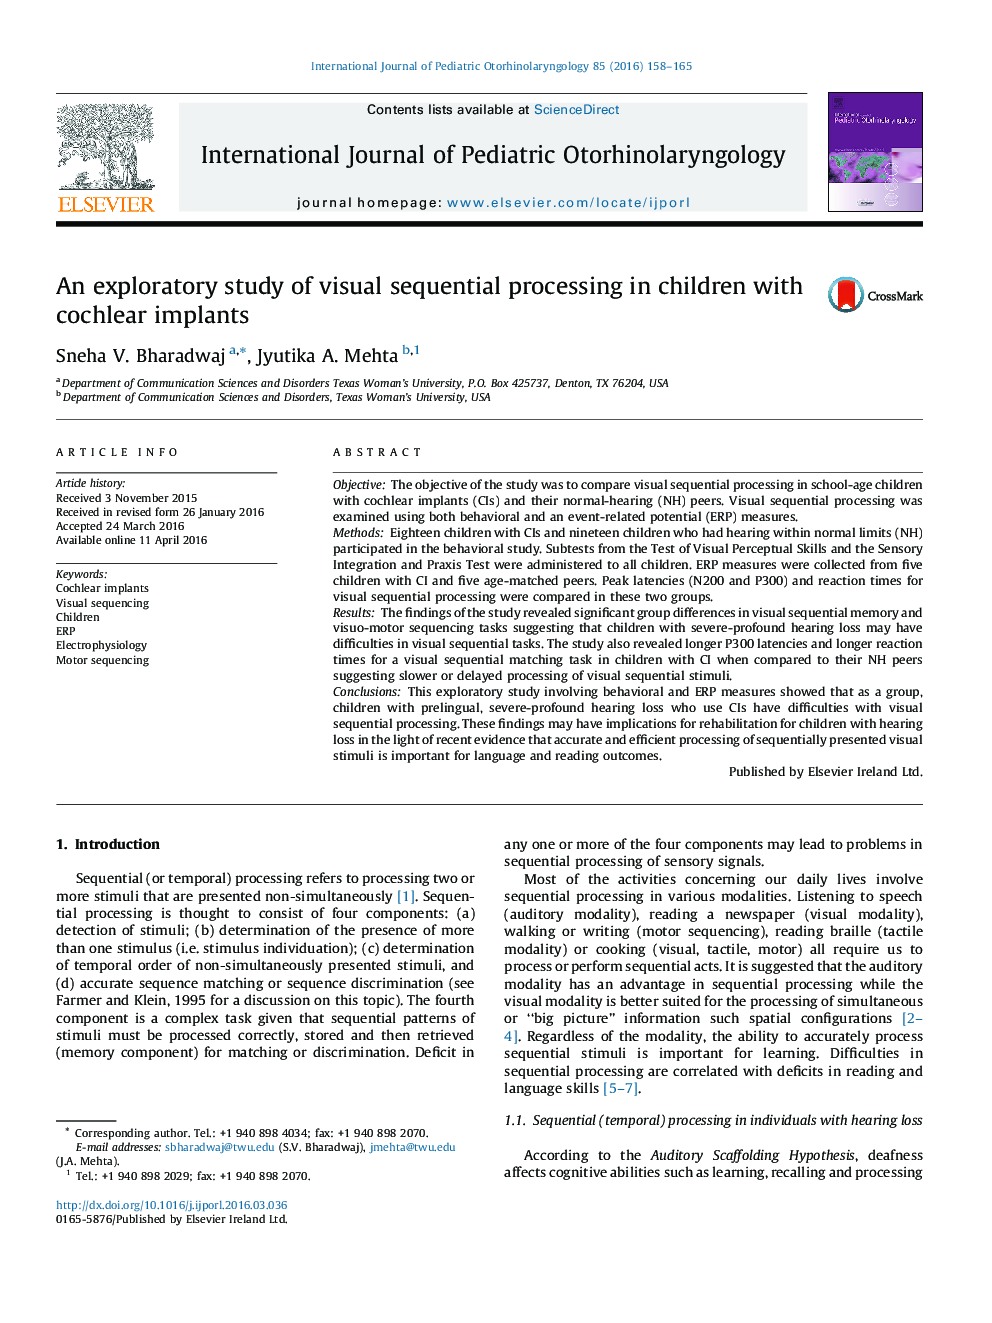 An exploratory study of visual sequential processing in children with cochlear implants